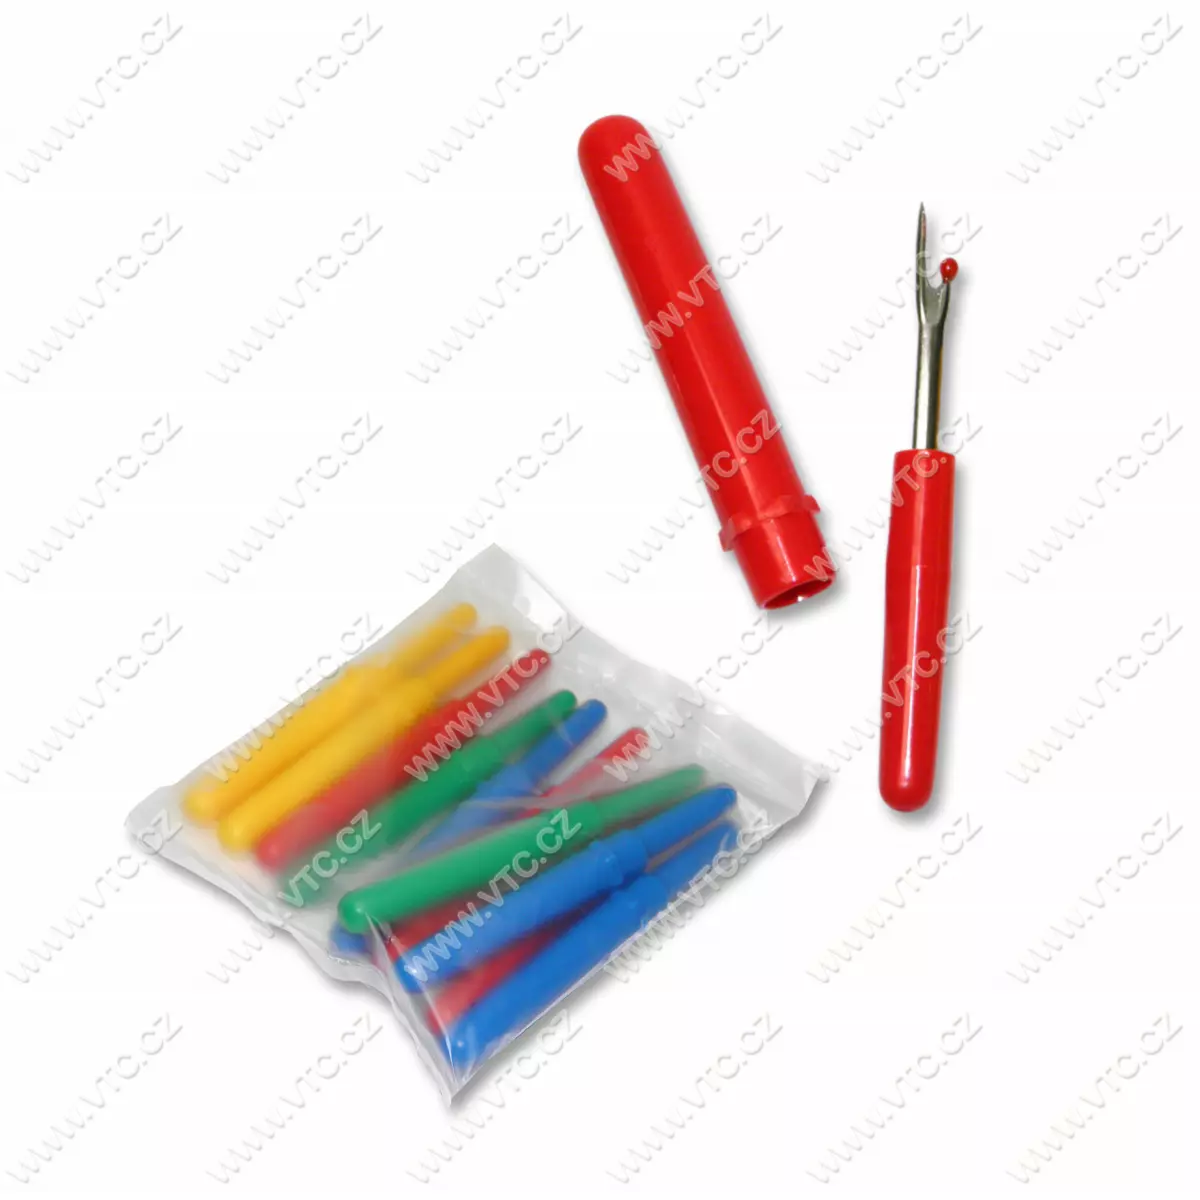  65 Pcs Seam Ripper Set, Seam Rippers for Sewing